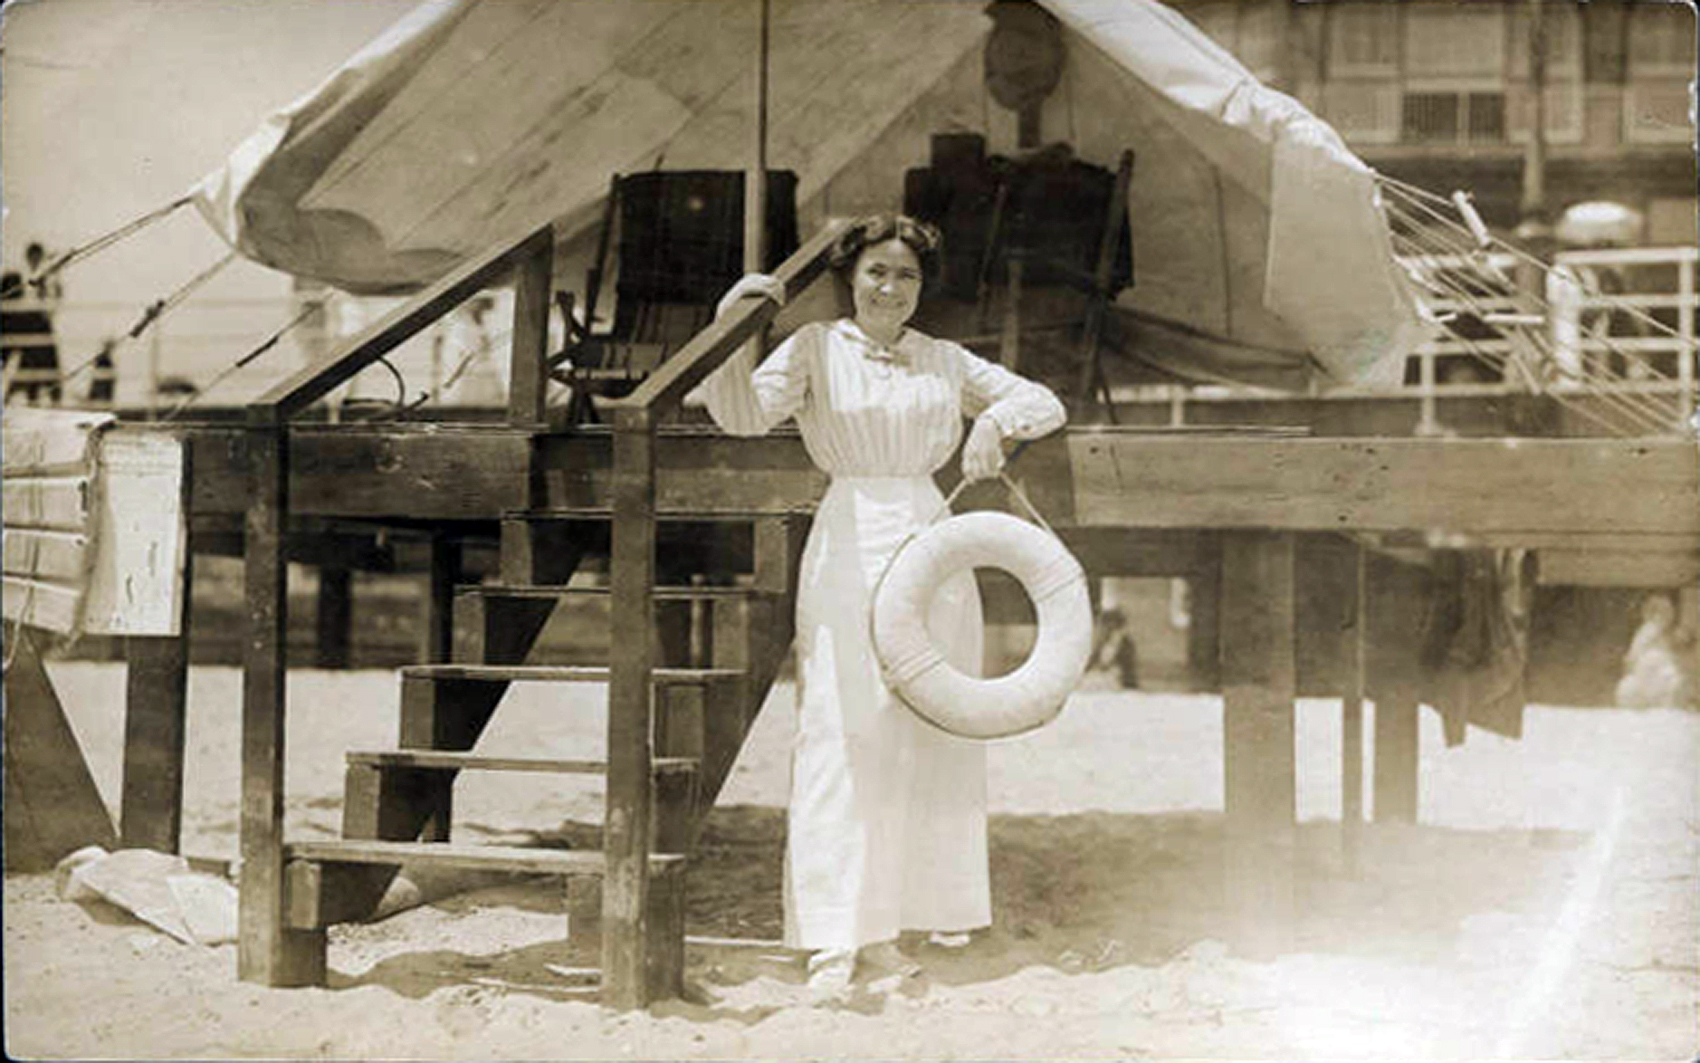 Atlantic City - Young woman with a life ring posed on the boardwalk steps - Harper B Smith